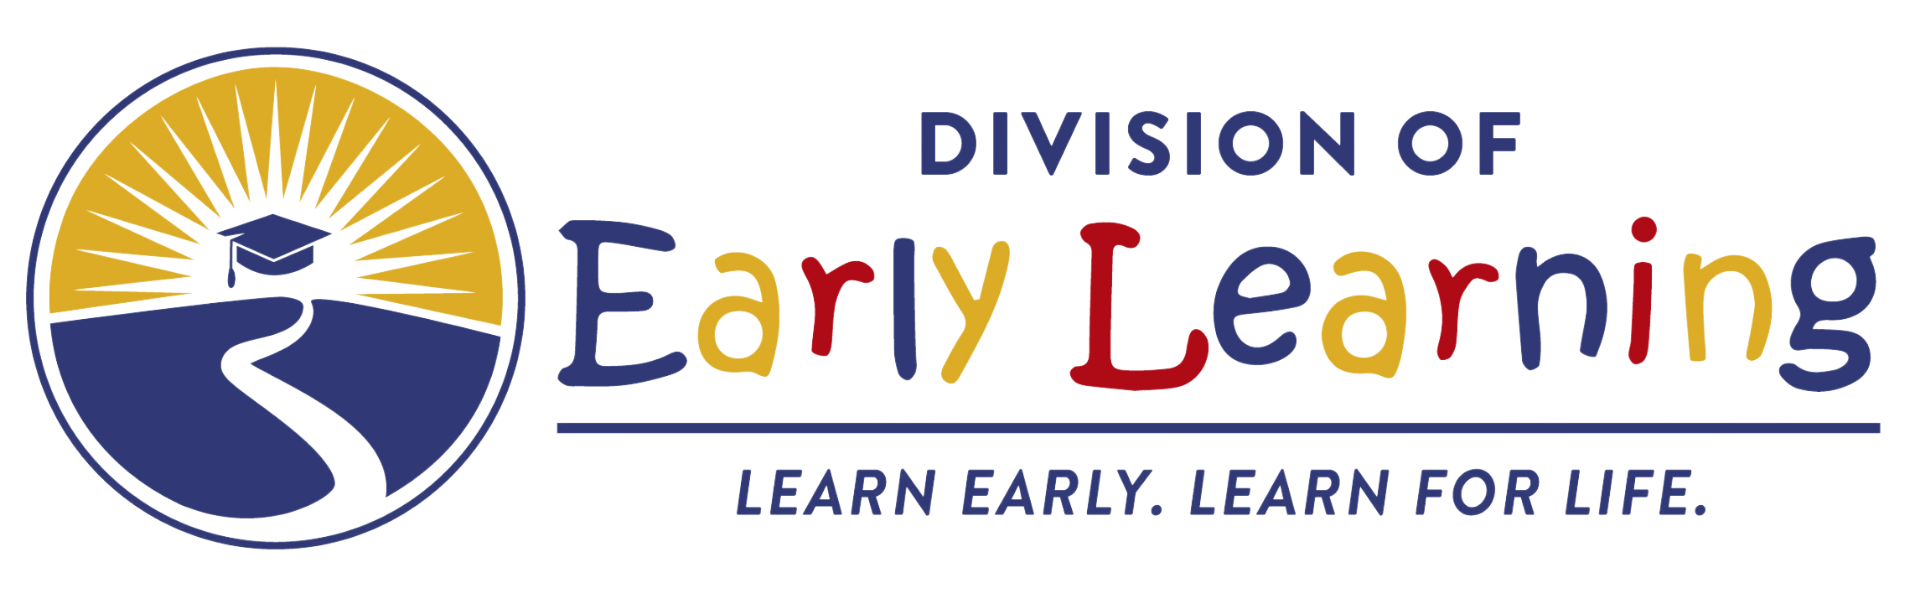 Florida Division of Early Learning. 